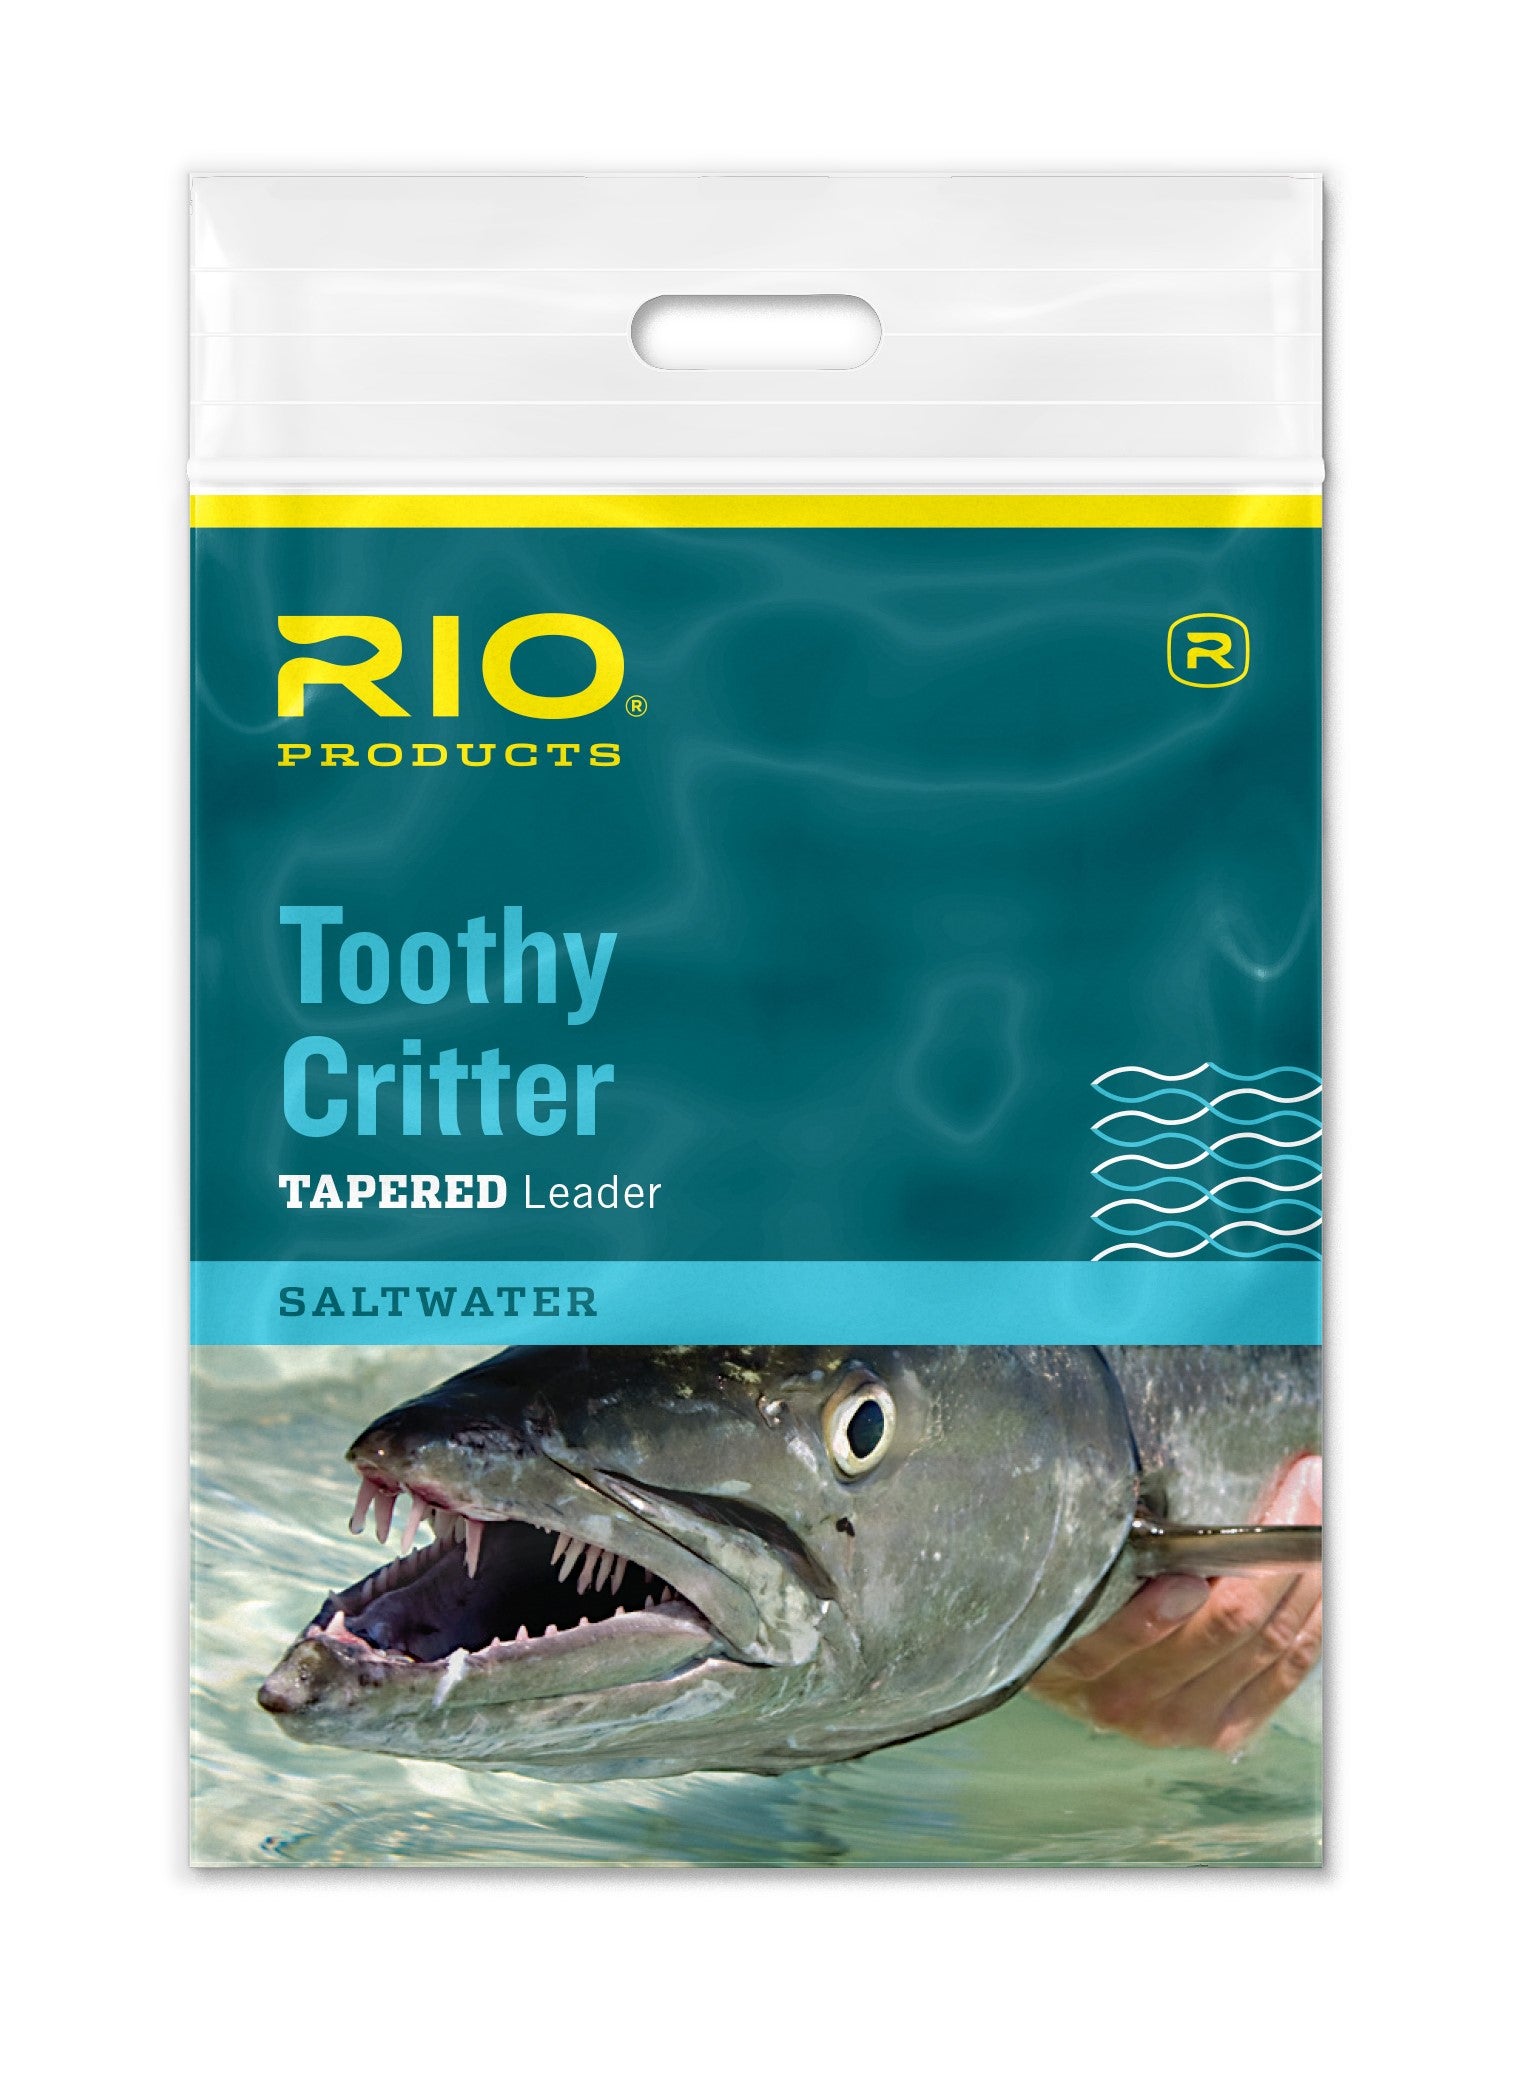 Scientific Anglers Absolute Fluorocarbon TROUT // Supple Tippet 0X